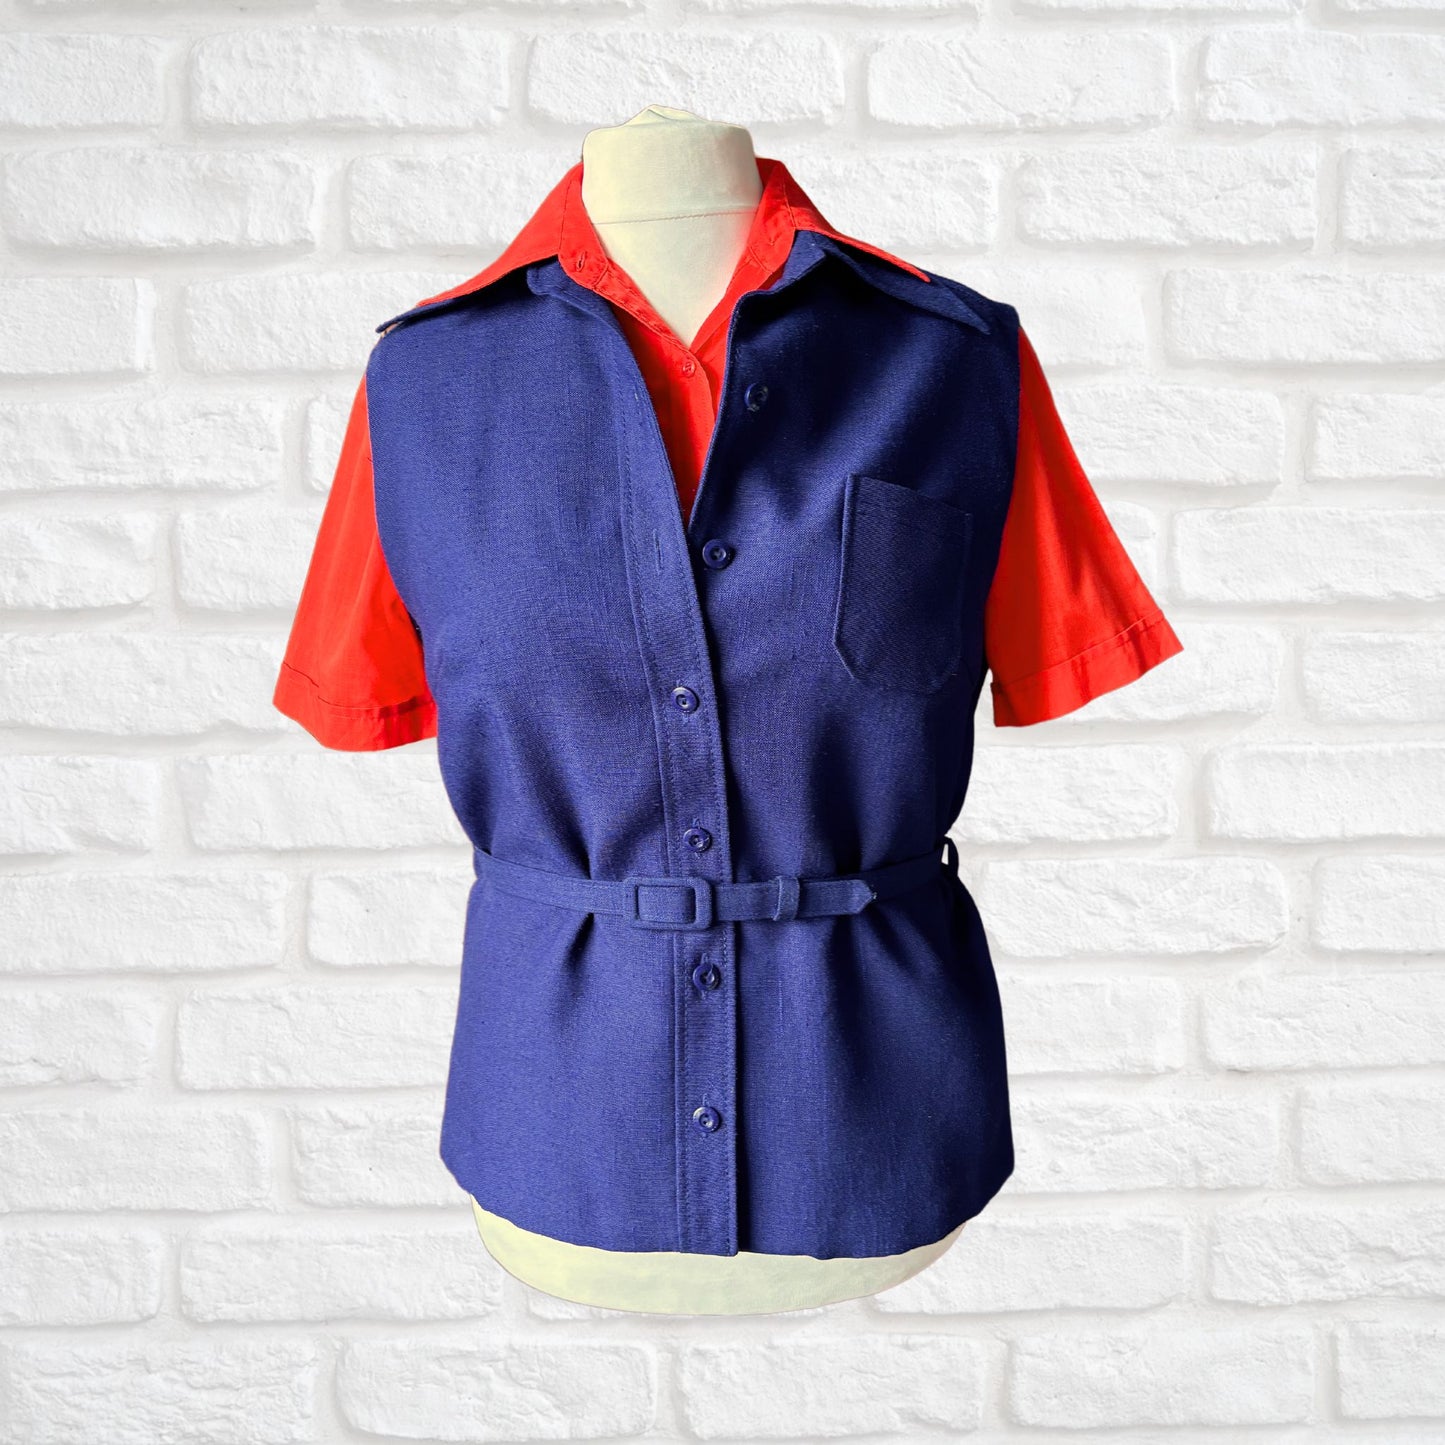 Vintage 70s Navy Blue Belted Waistcoat Top with Dagger Collar.Approx UK size 14-16